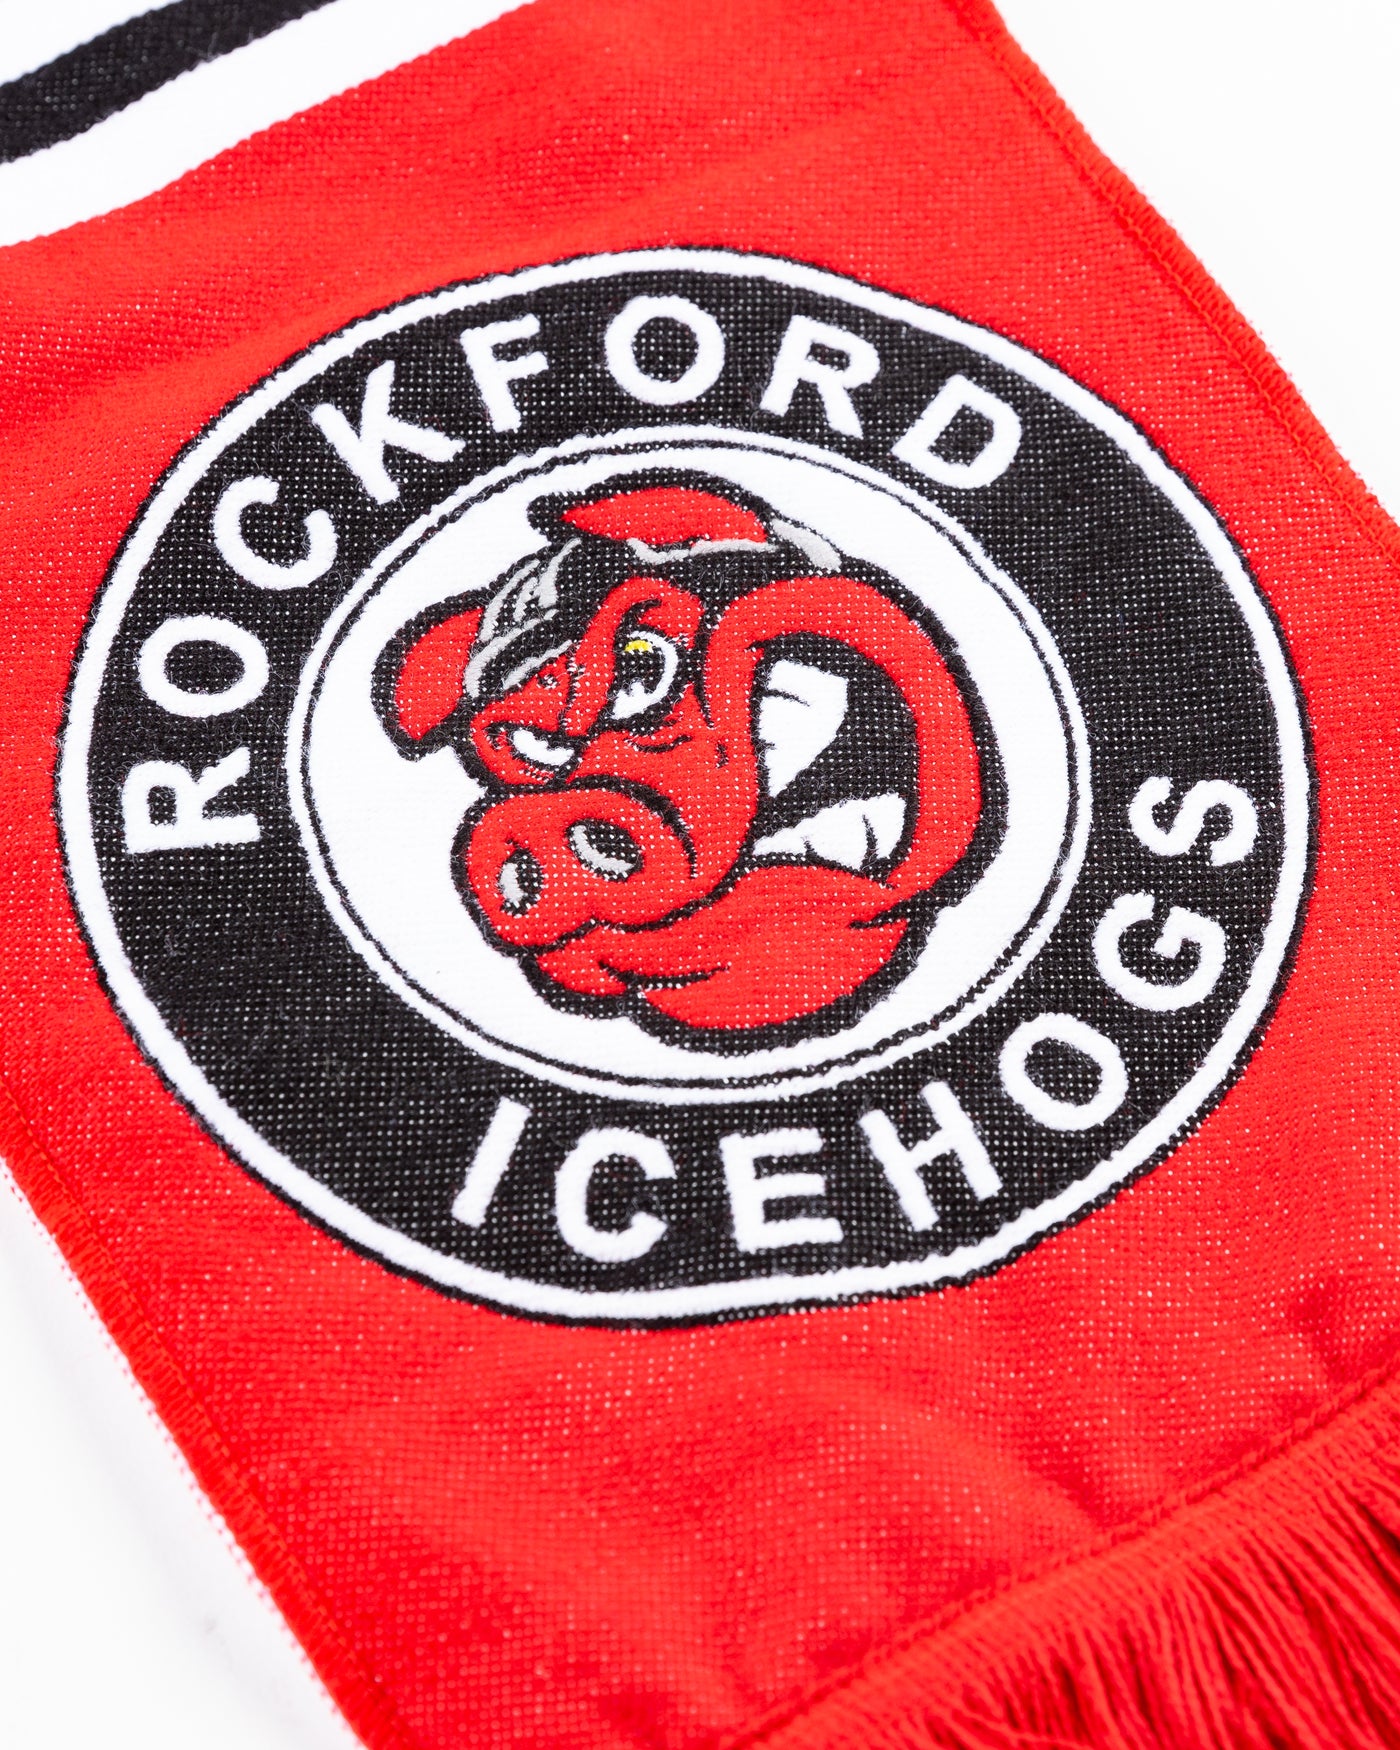 red Rockford IceHogs scarf with wordmark, logo and secondary Chicago Blackhawks logo - detail logo lay flat